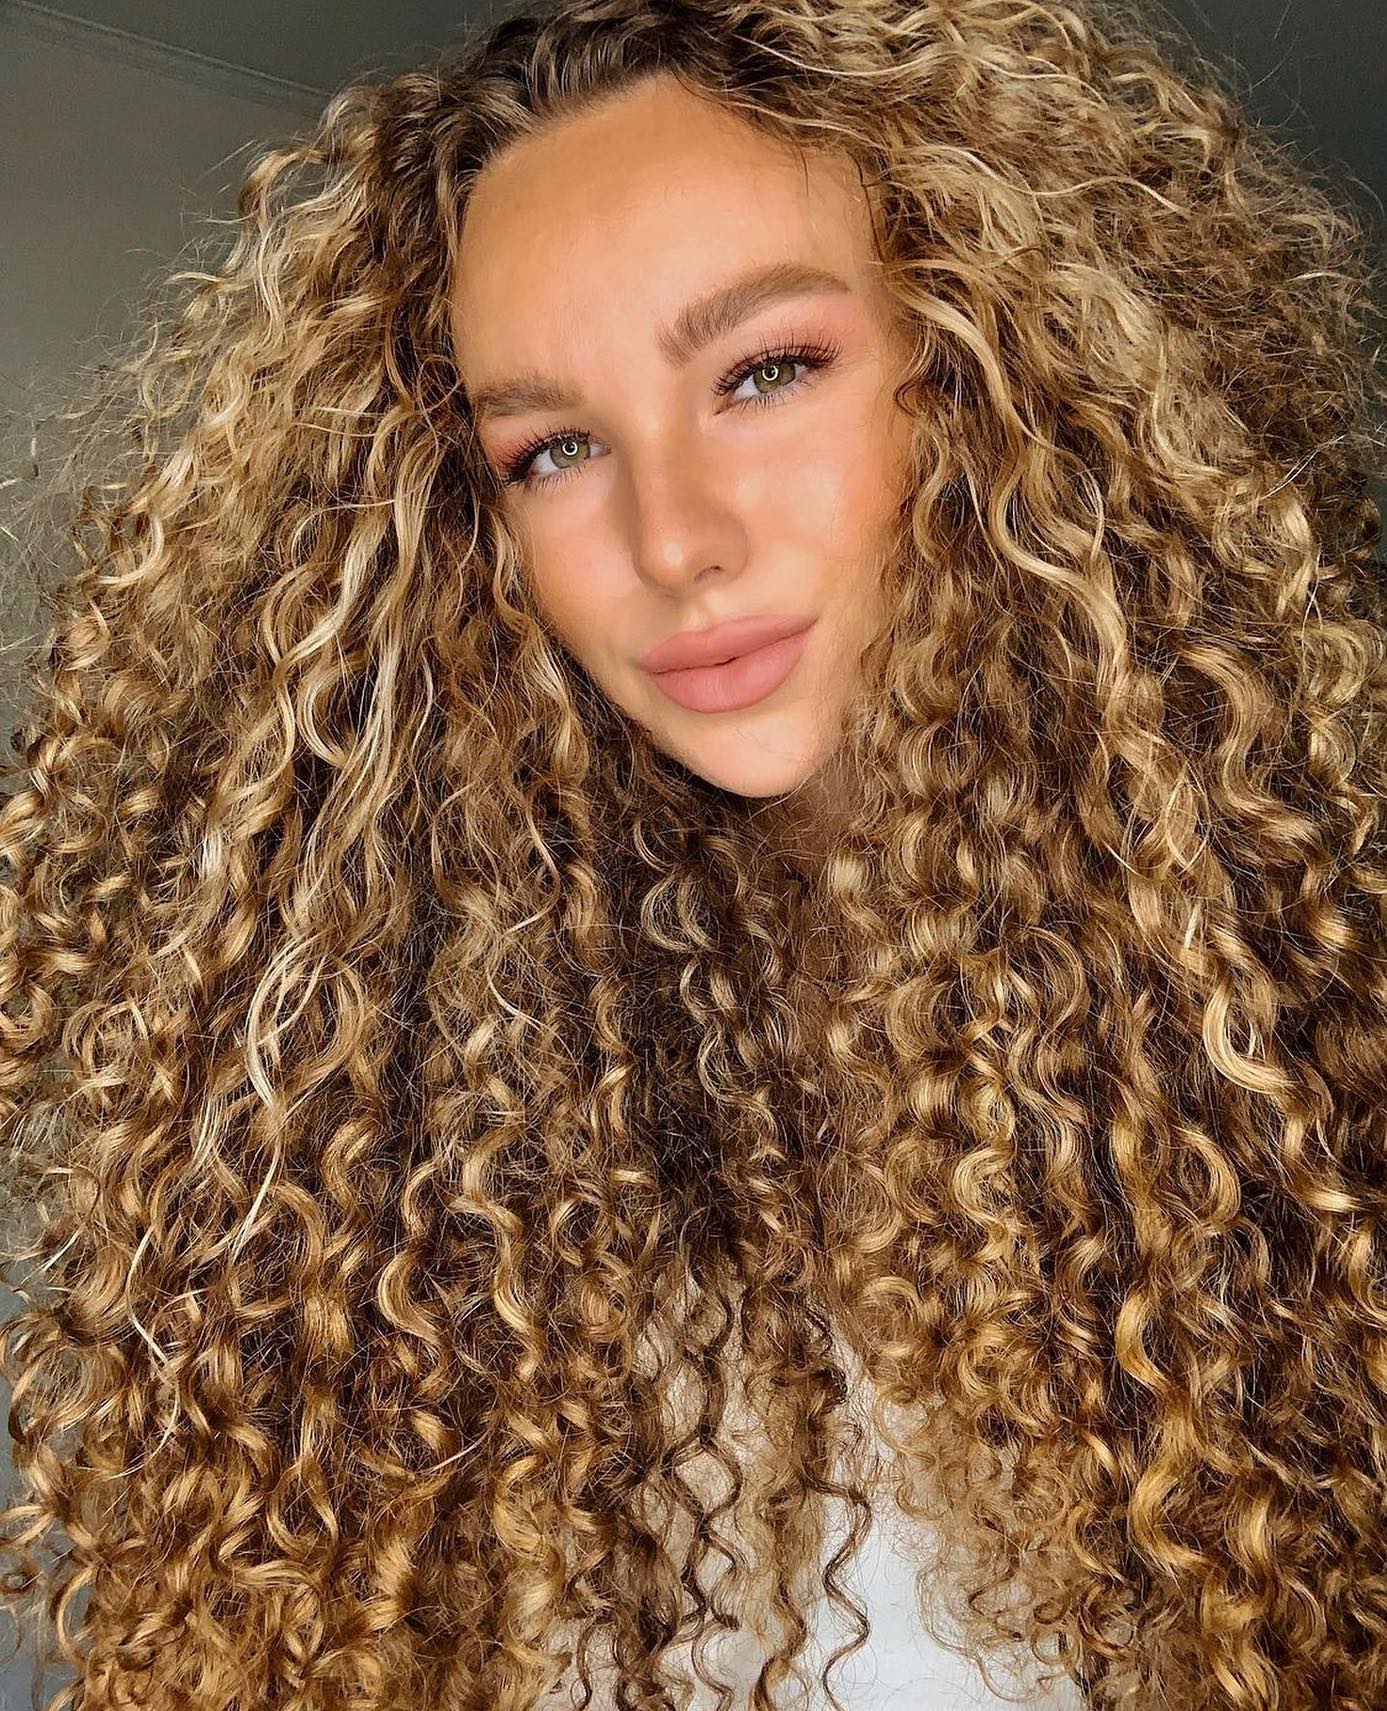 Texture Tuesday ✨While we use the curl typing system as a starting point, we can agree that textured hair doesn’t fit in a box. Most of us have multiple curl patterns (and porosities) throughout our hair, which is why some people describe their hair as multi-textured. How do you feel about the curl typing system? Is it helpful? Does it really matter? What’s most important for you when it comes to understanding your unique hair texture? Share with us below 